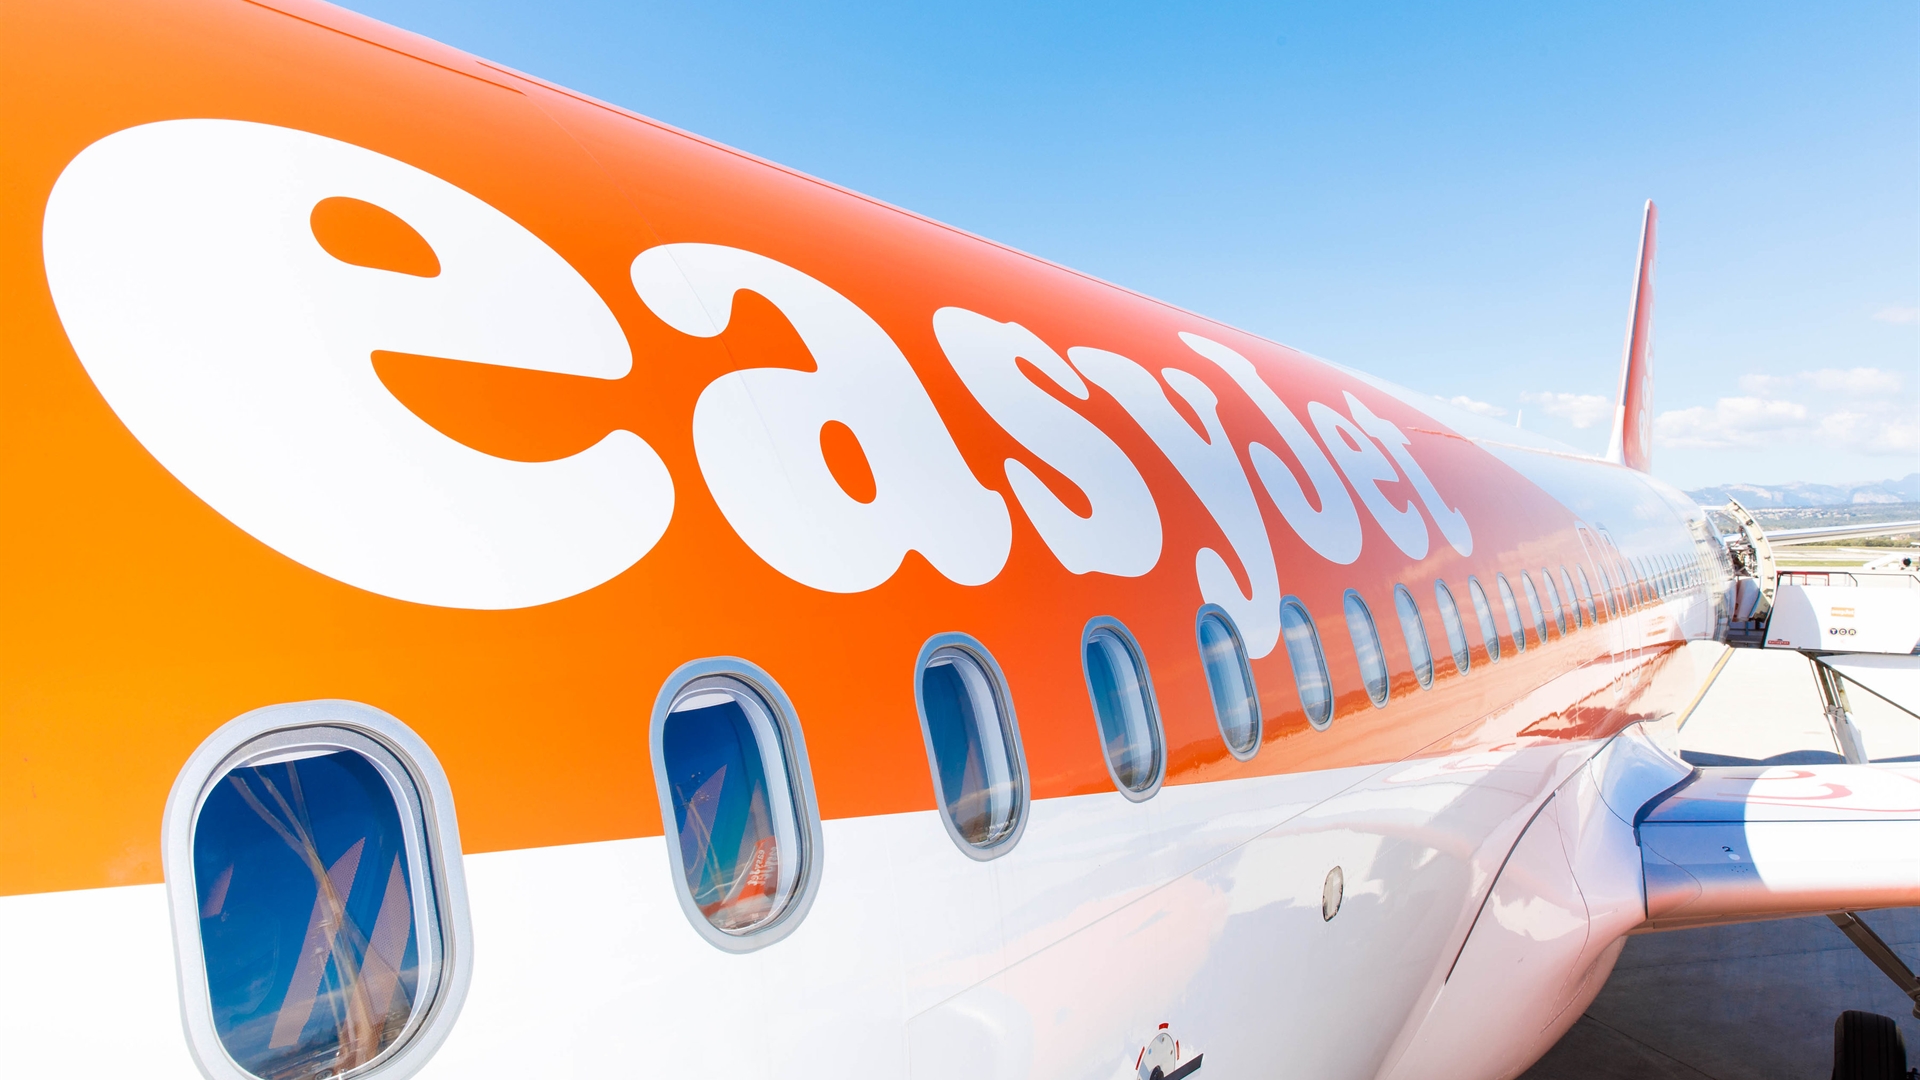 easyJet opens new Birmingham Airport base with 16 new routes